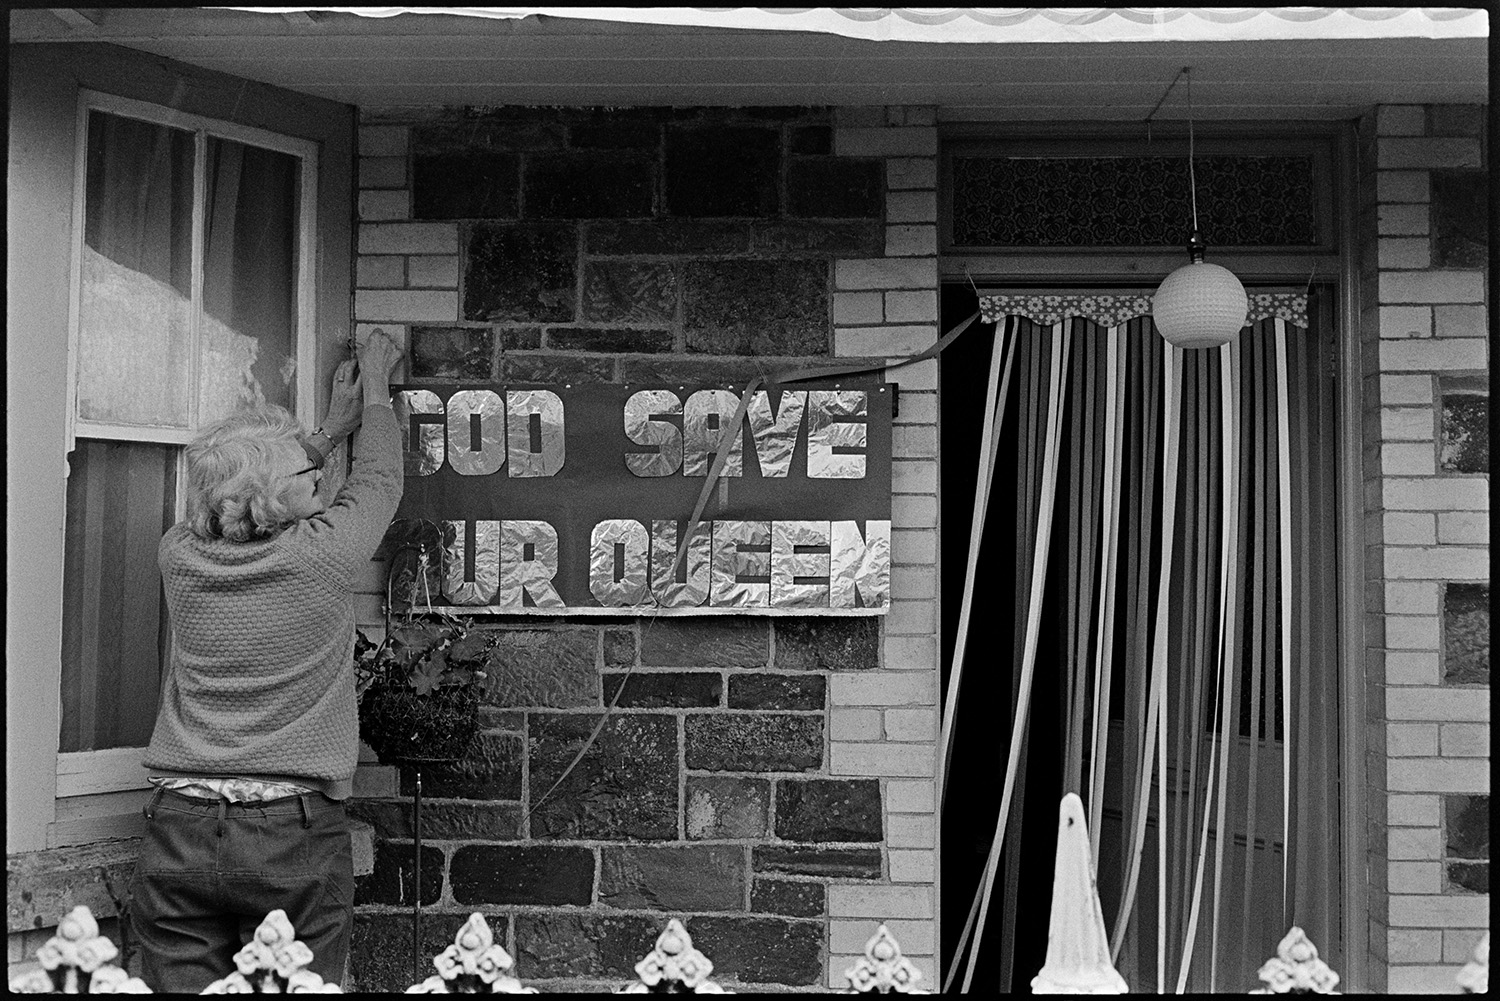 Houses decorated for Silver Jubilee, Electrical shop. 
[A man putting up a banner reading 'God Save Our Queen' on Queen Elizabeth II Silver Jubilee day, in Dolton.]